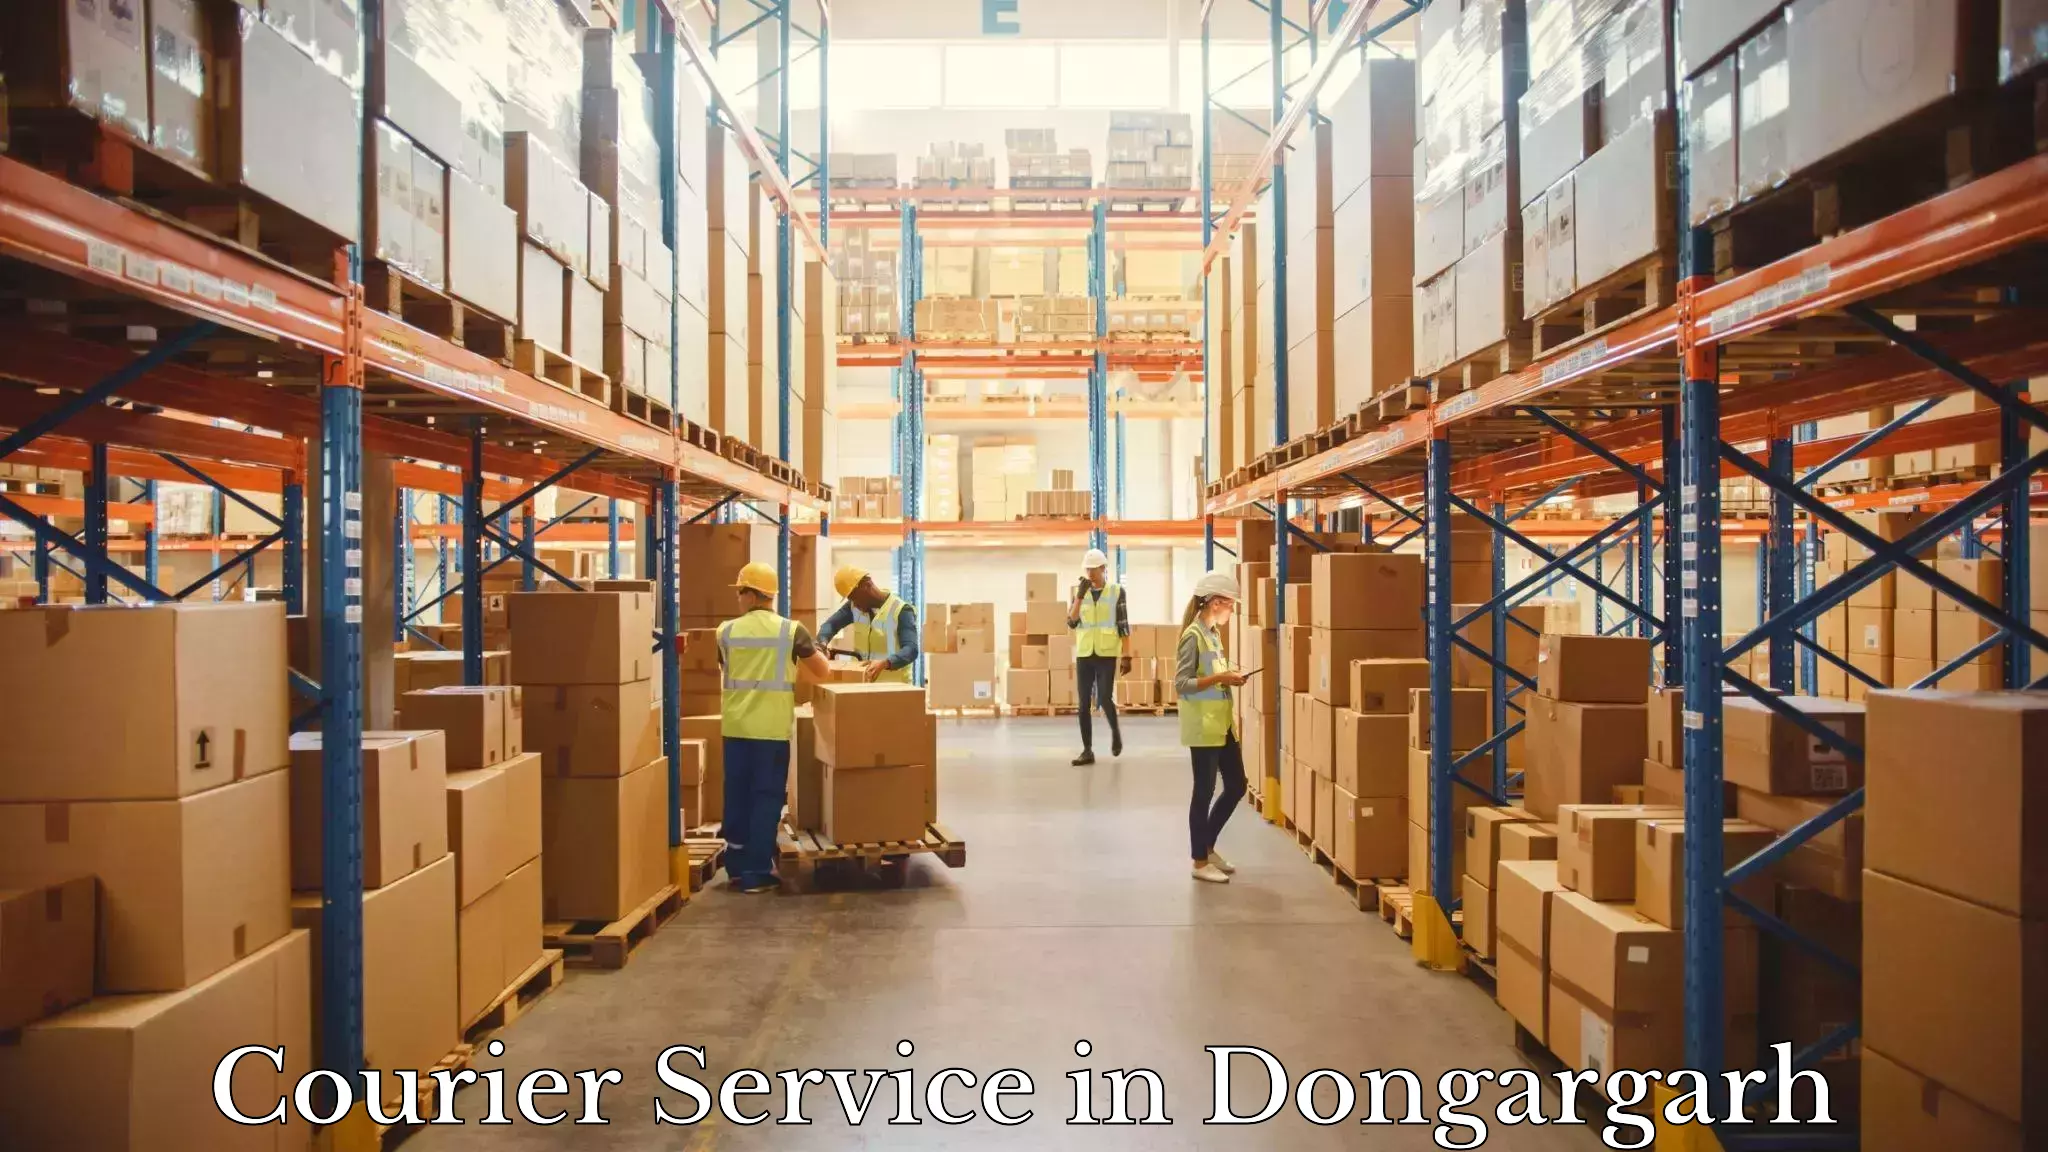 Customizable shipping options in Dongargarh